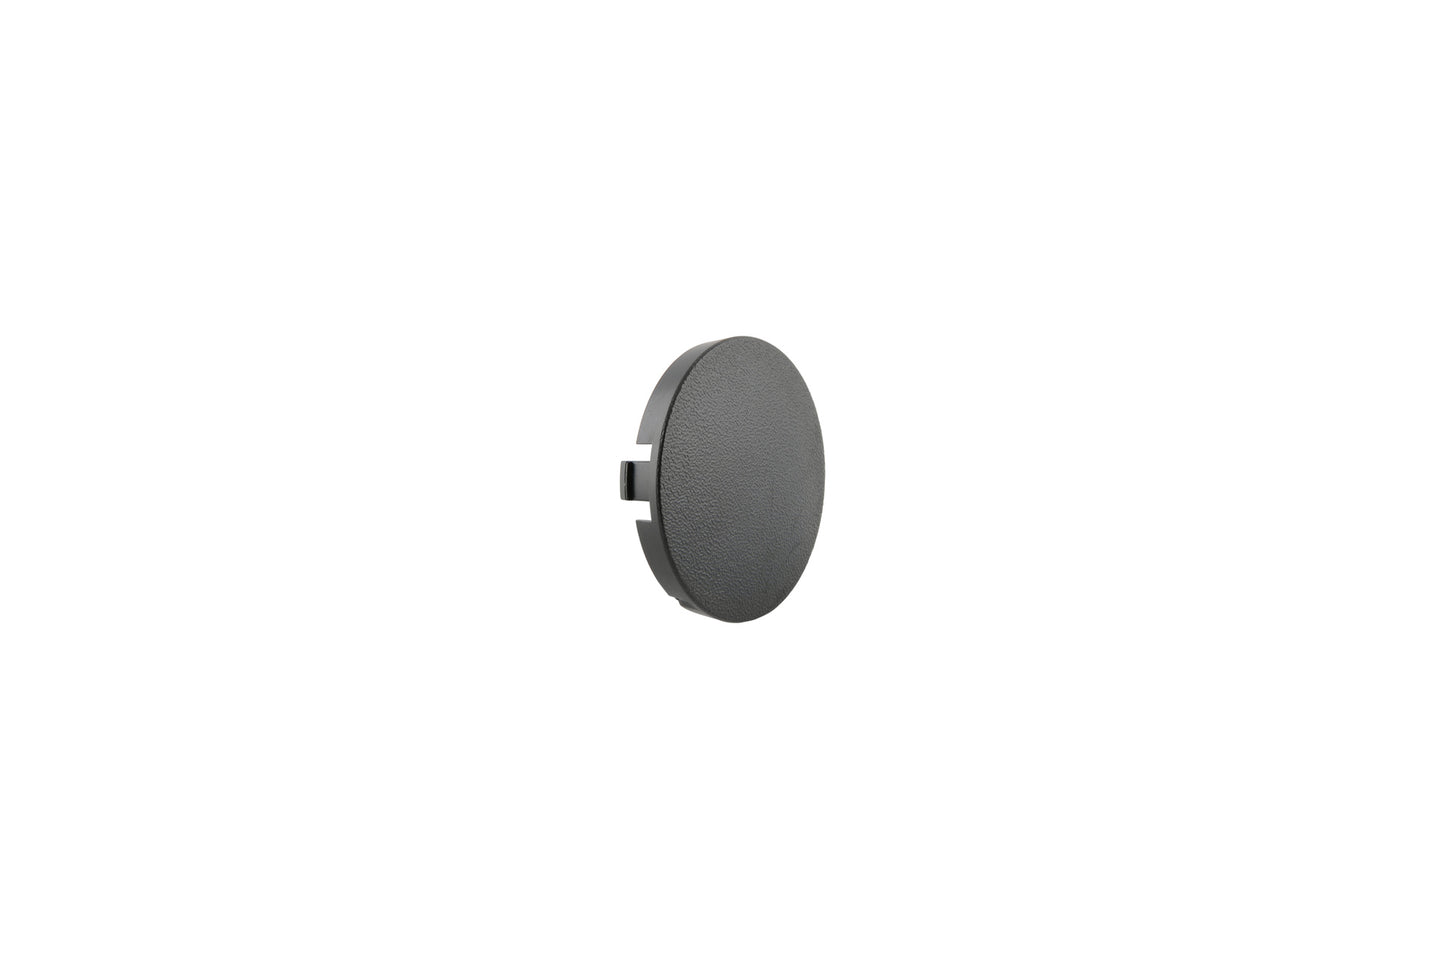 Cover for wiper interval switch, Black/Grey